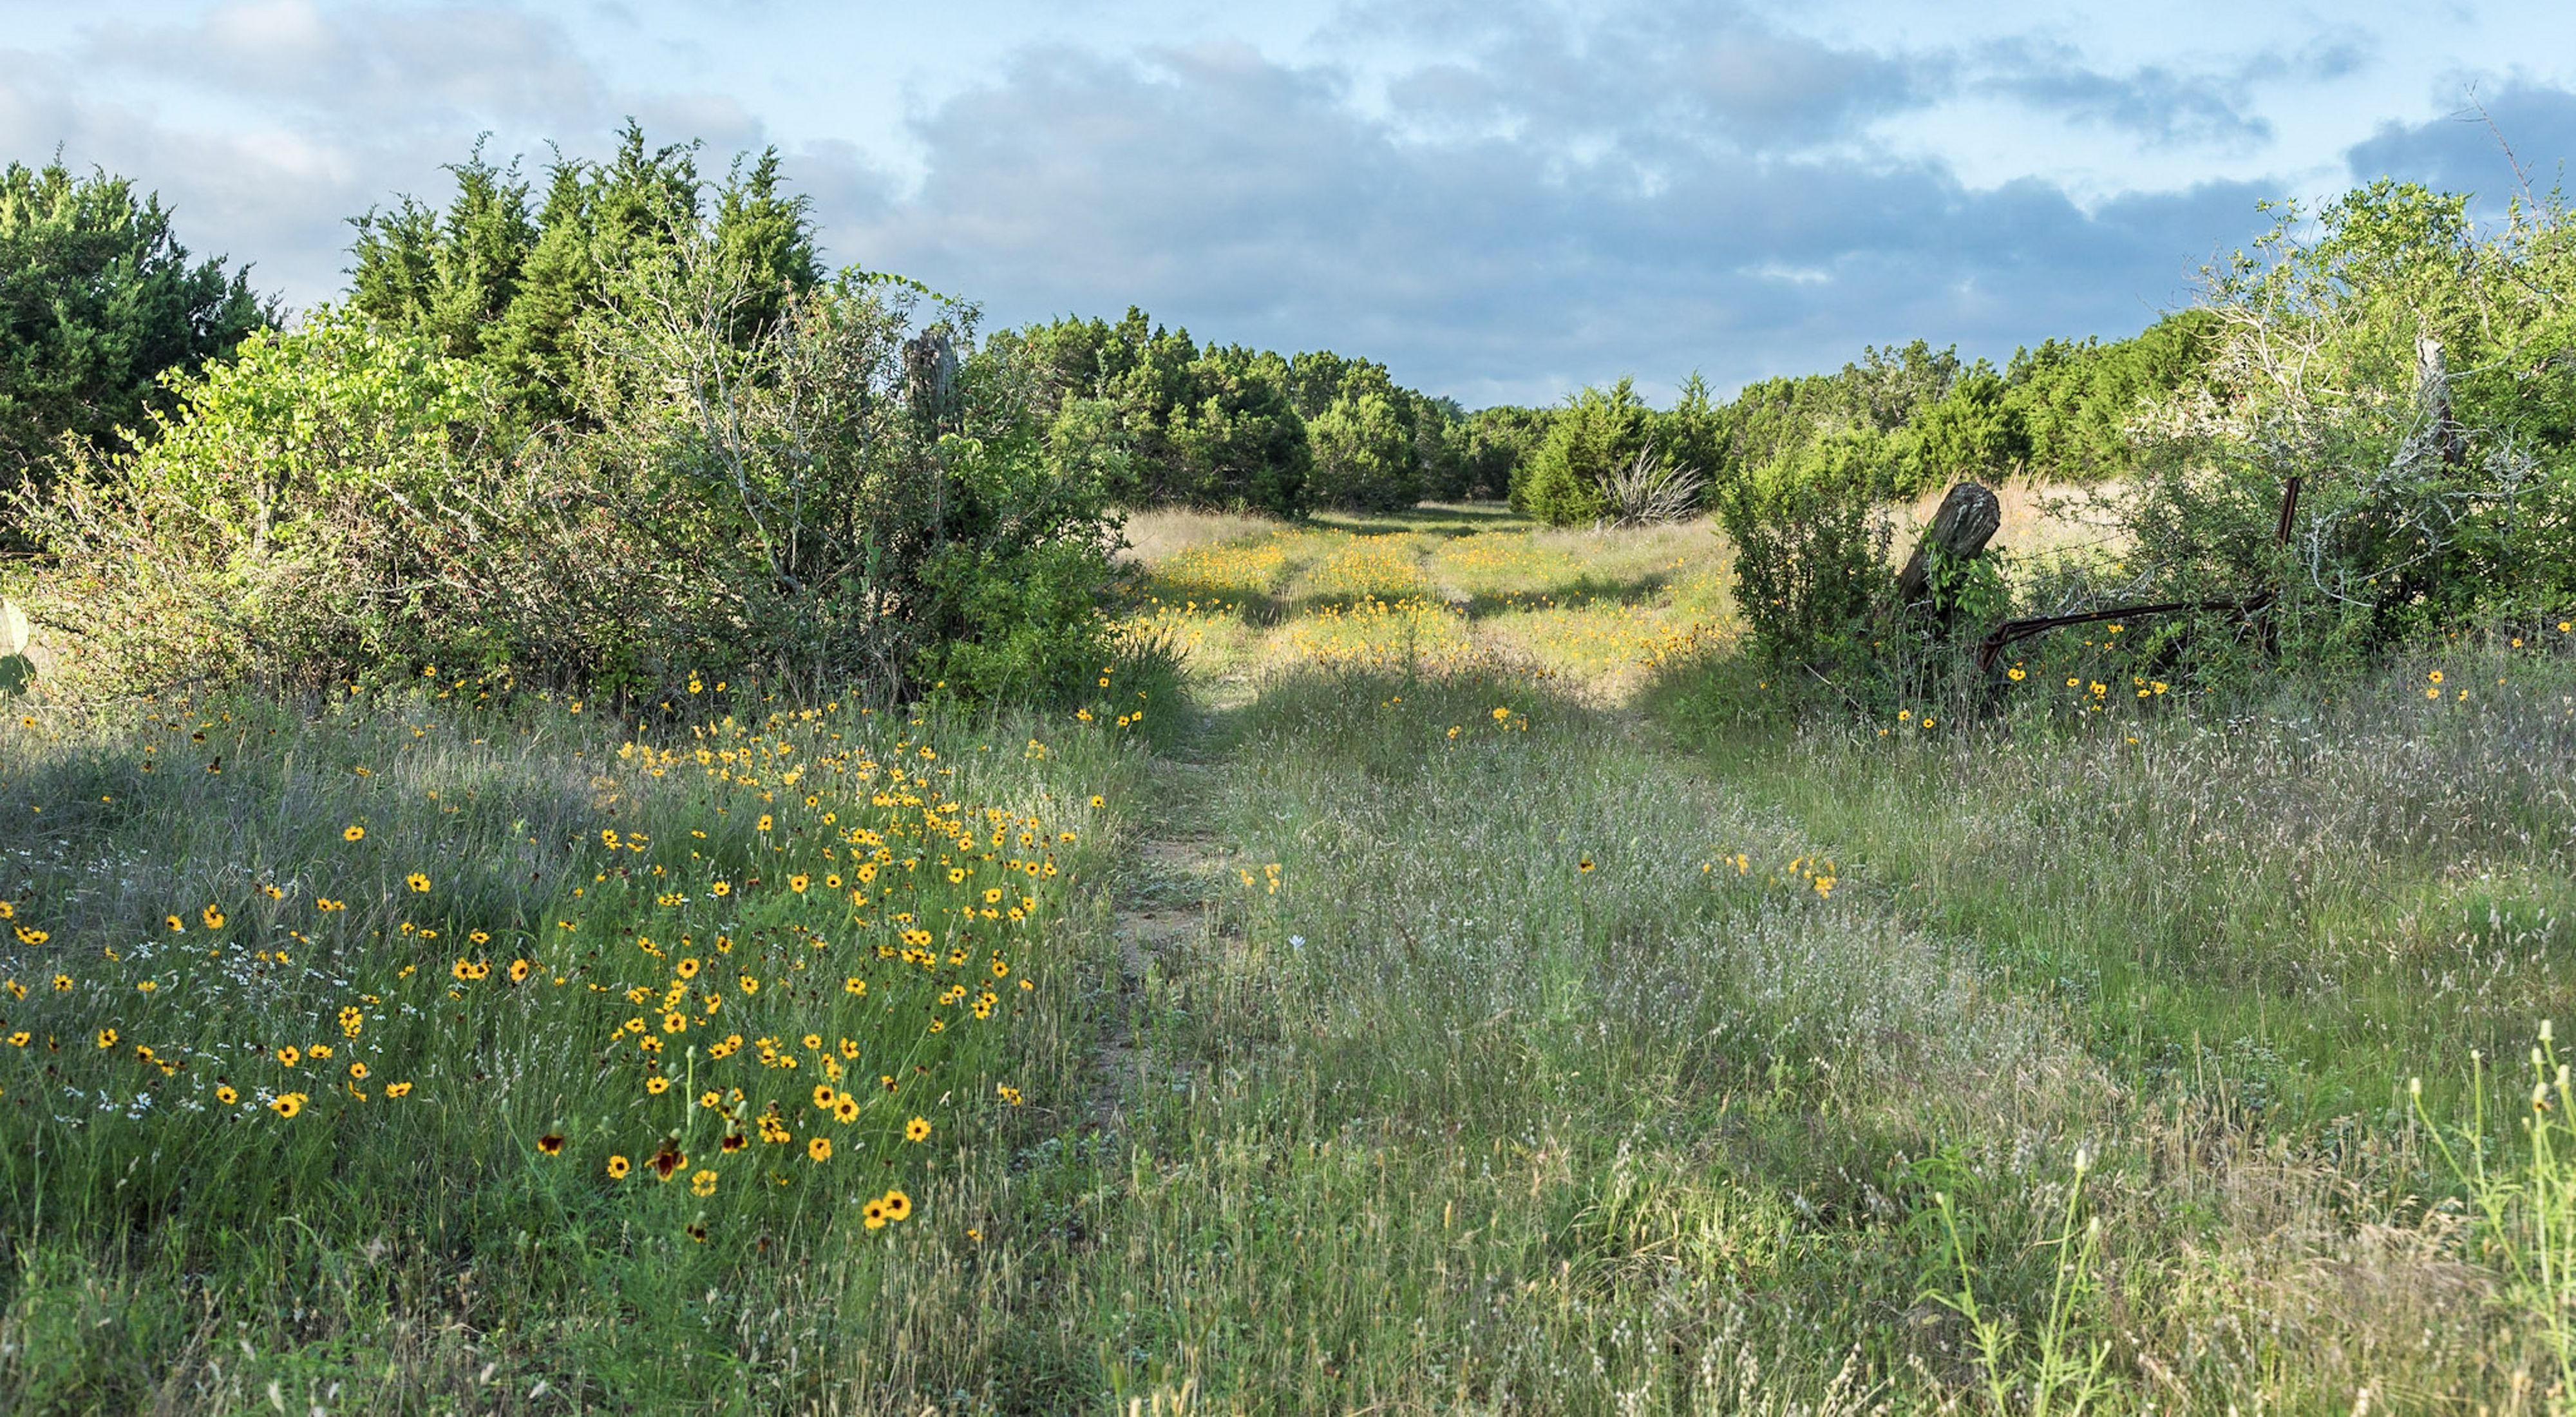 A field filled with white and yellow flowers with green shrubs in the distance.